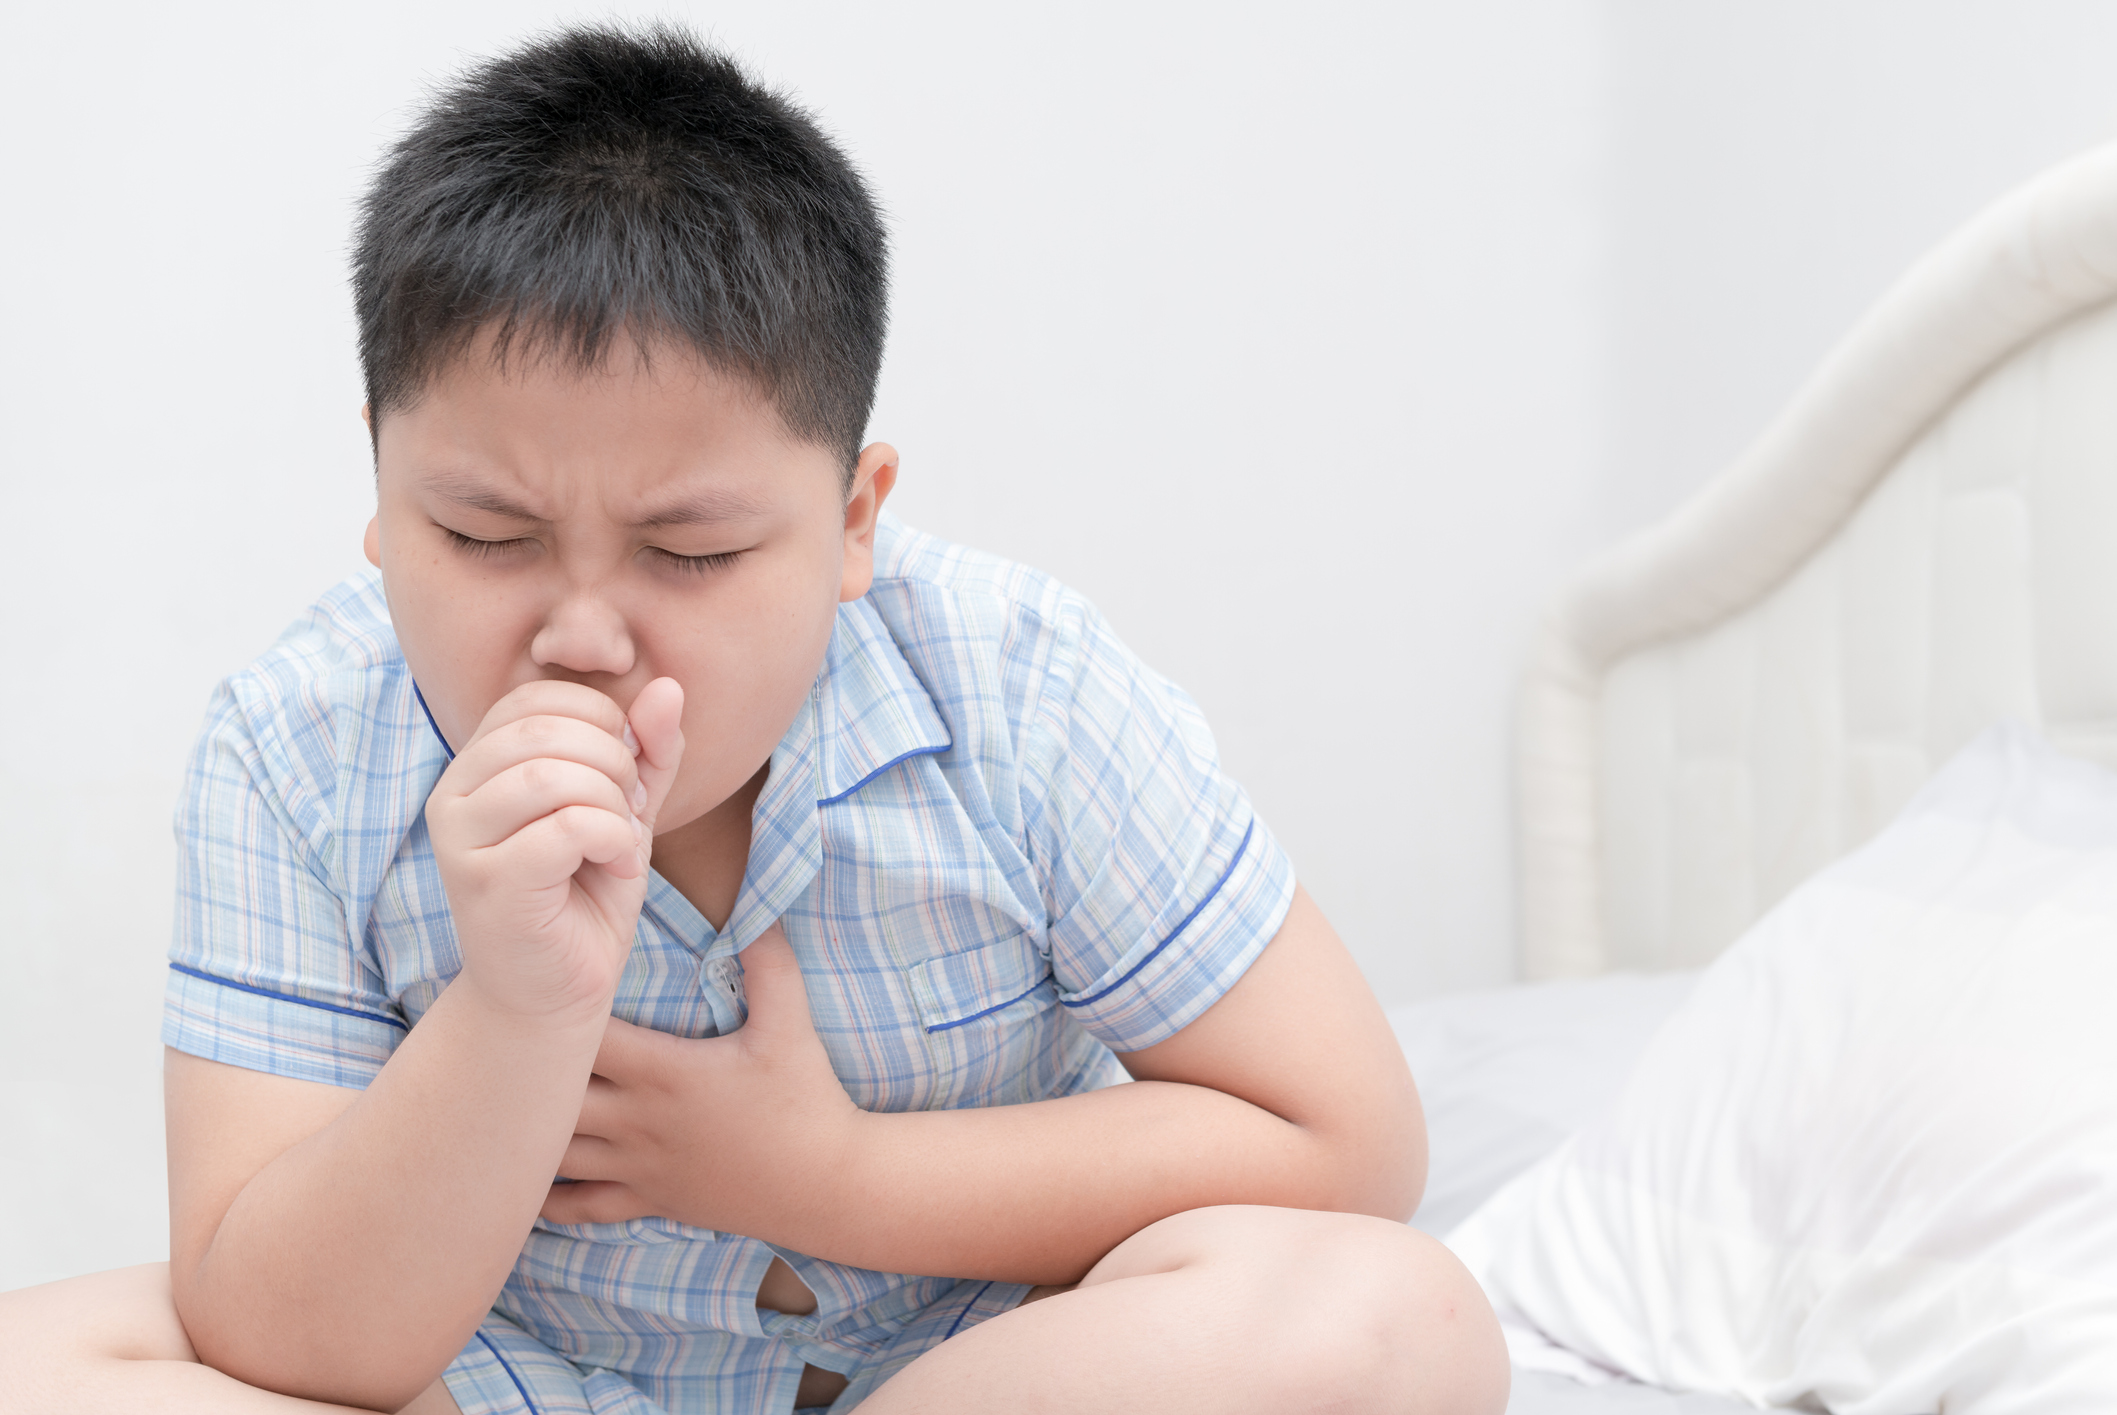 Causes of chronic coughing